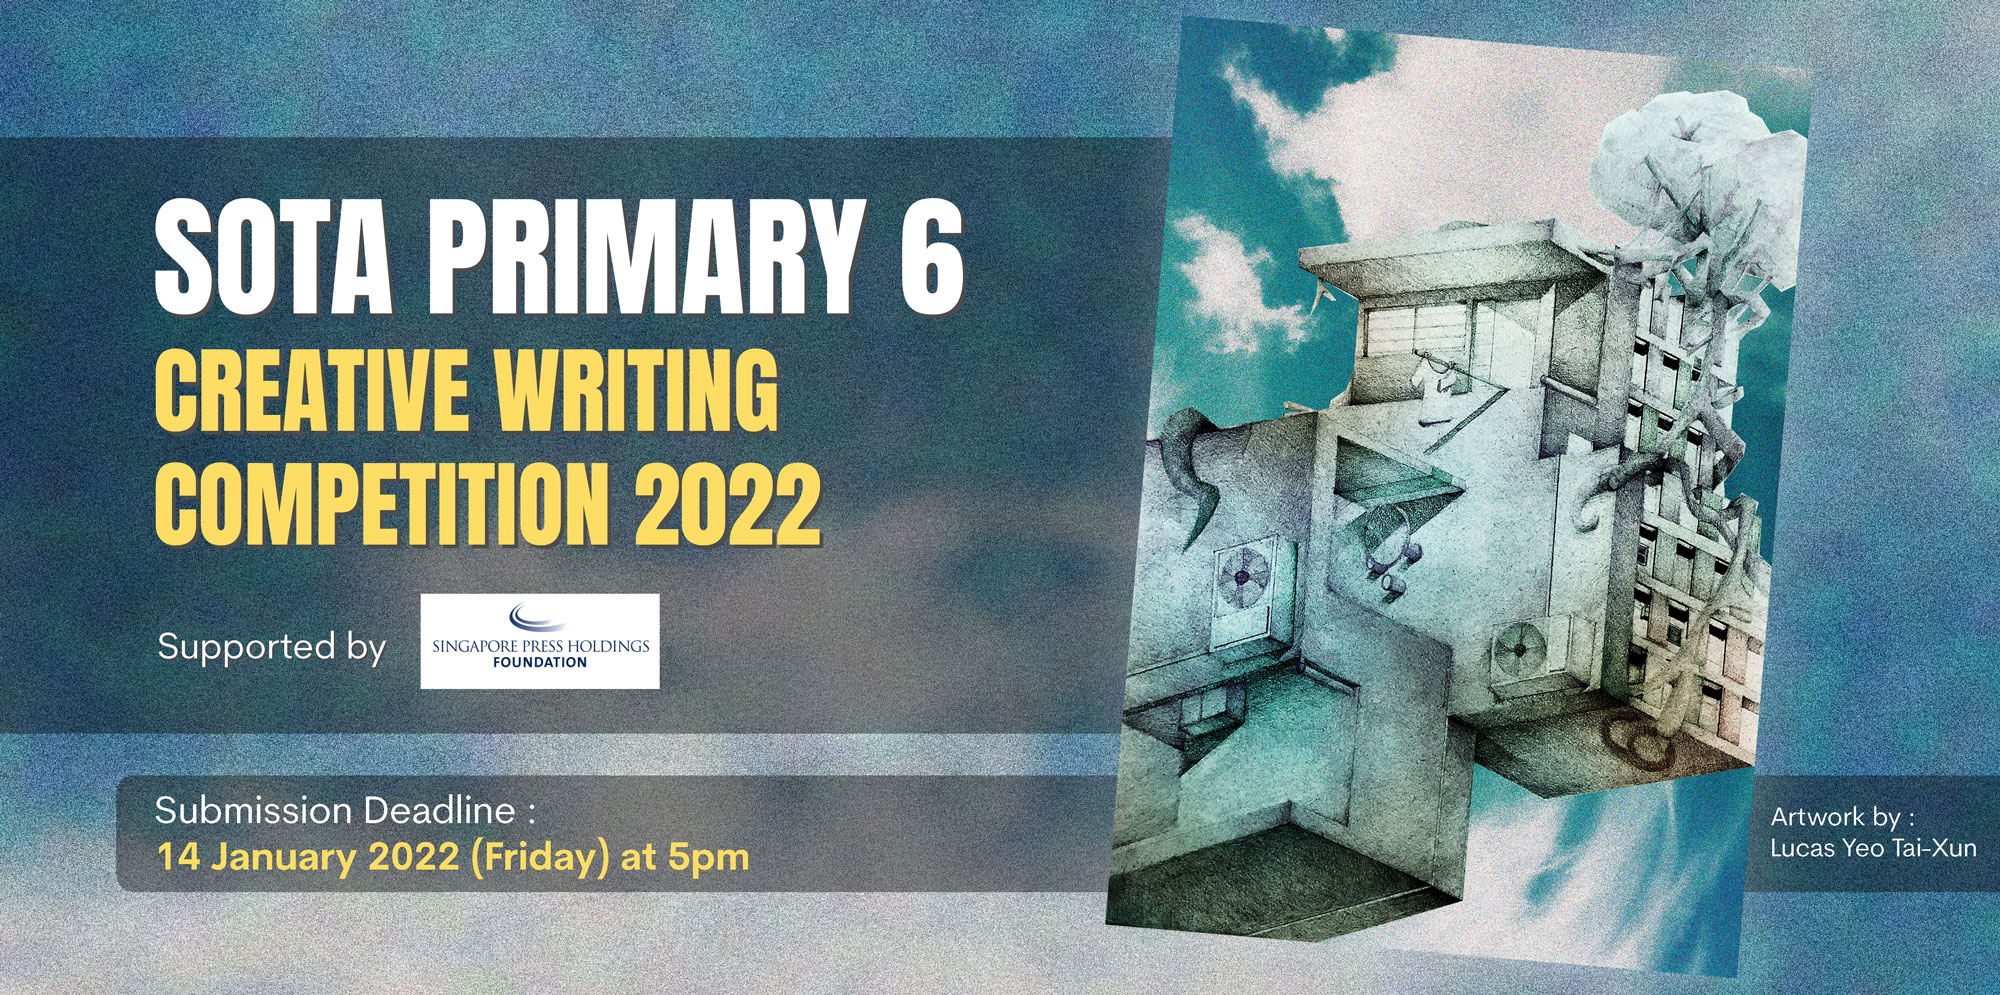 SOTA Primary 6 Creative Writing Competition 2022